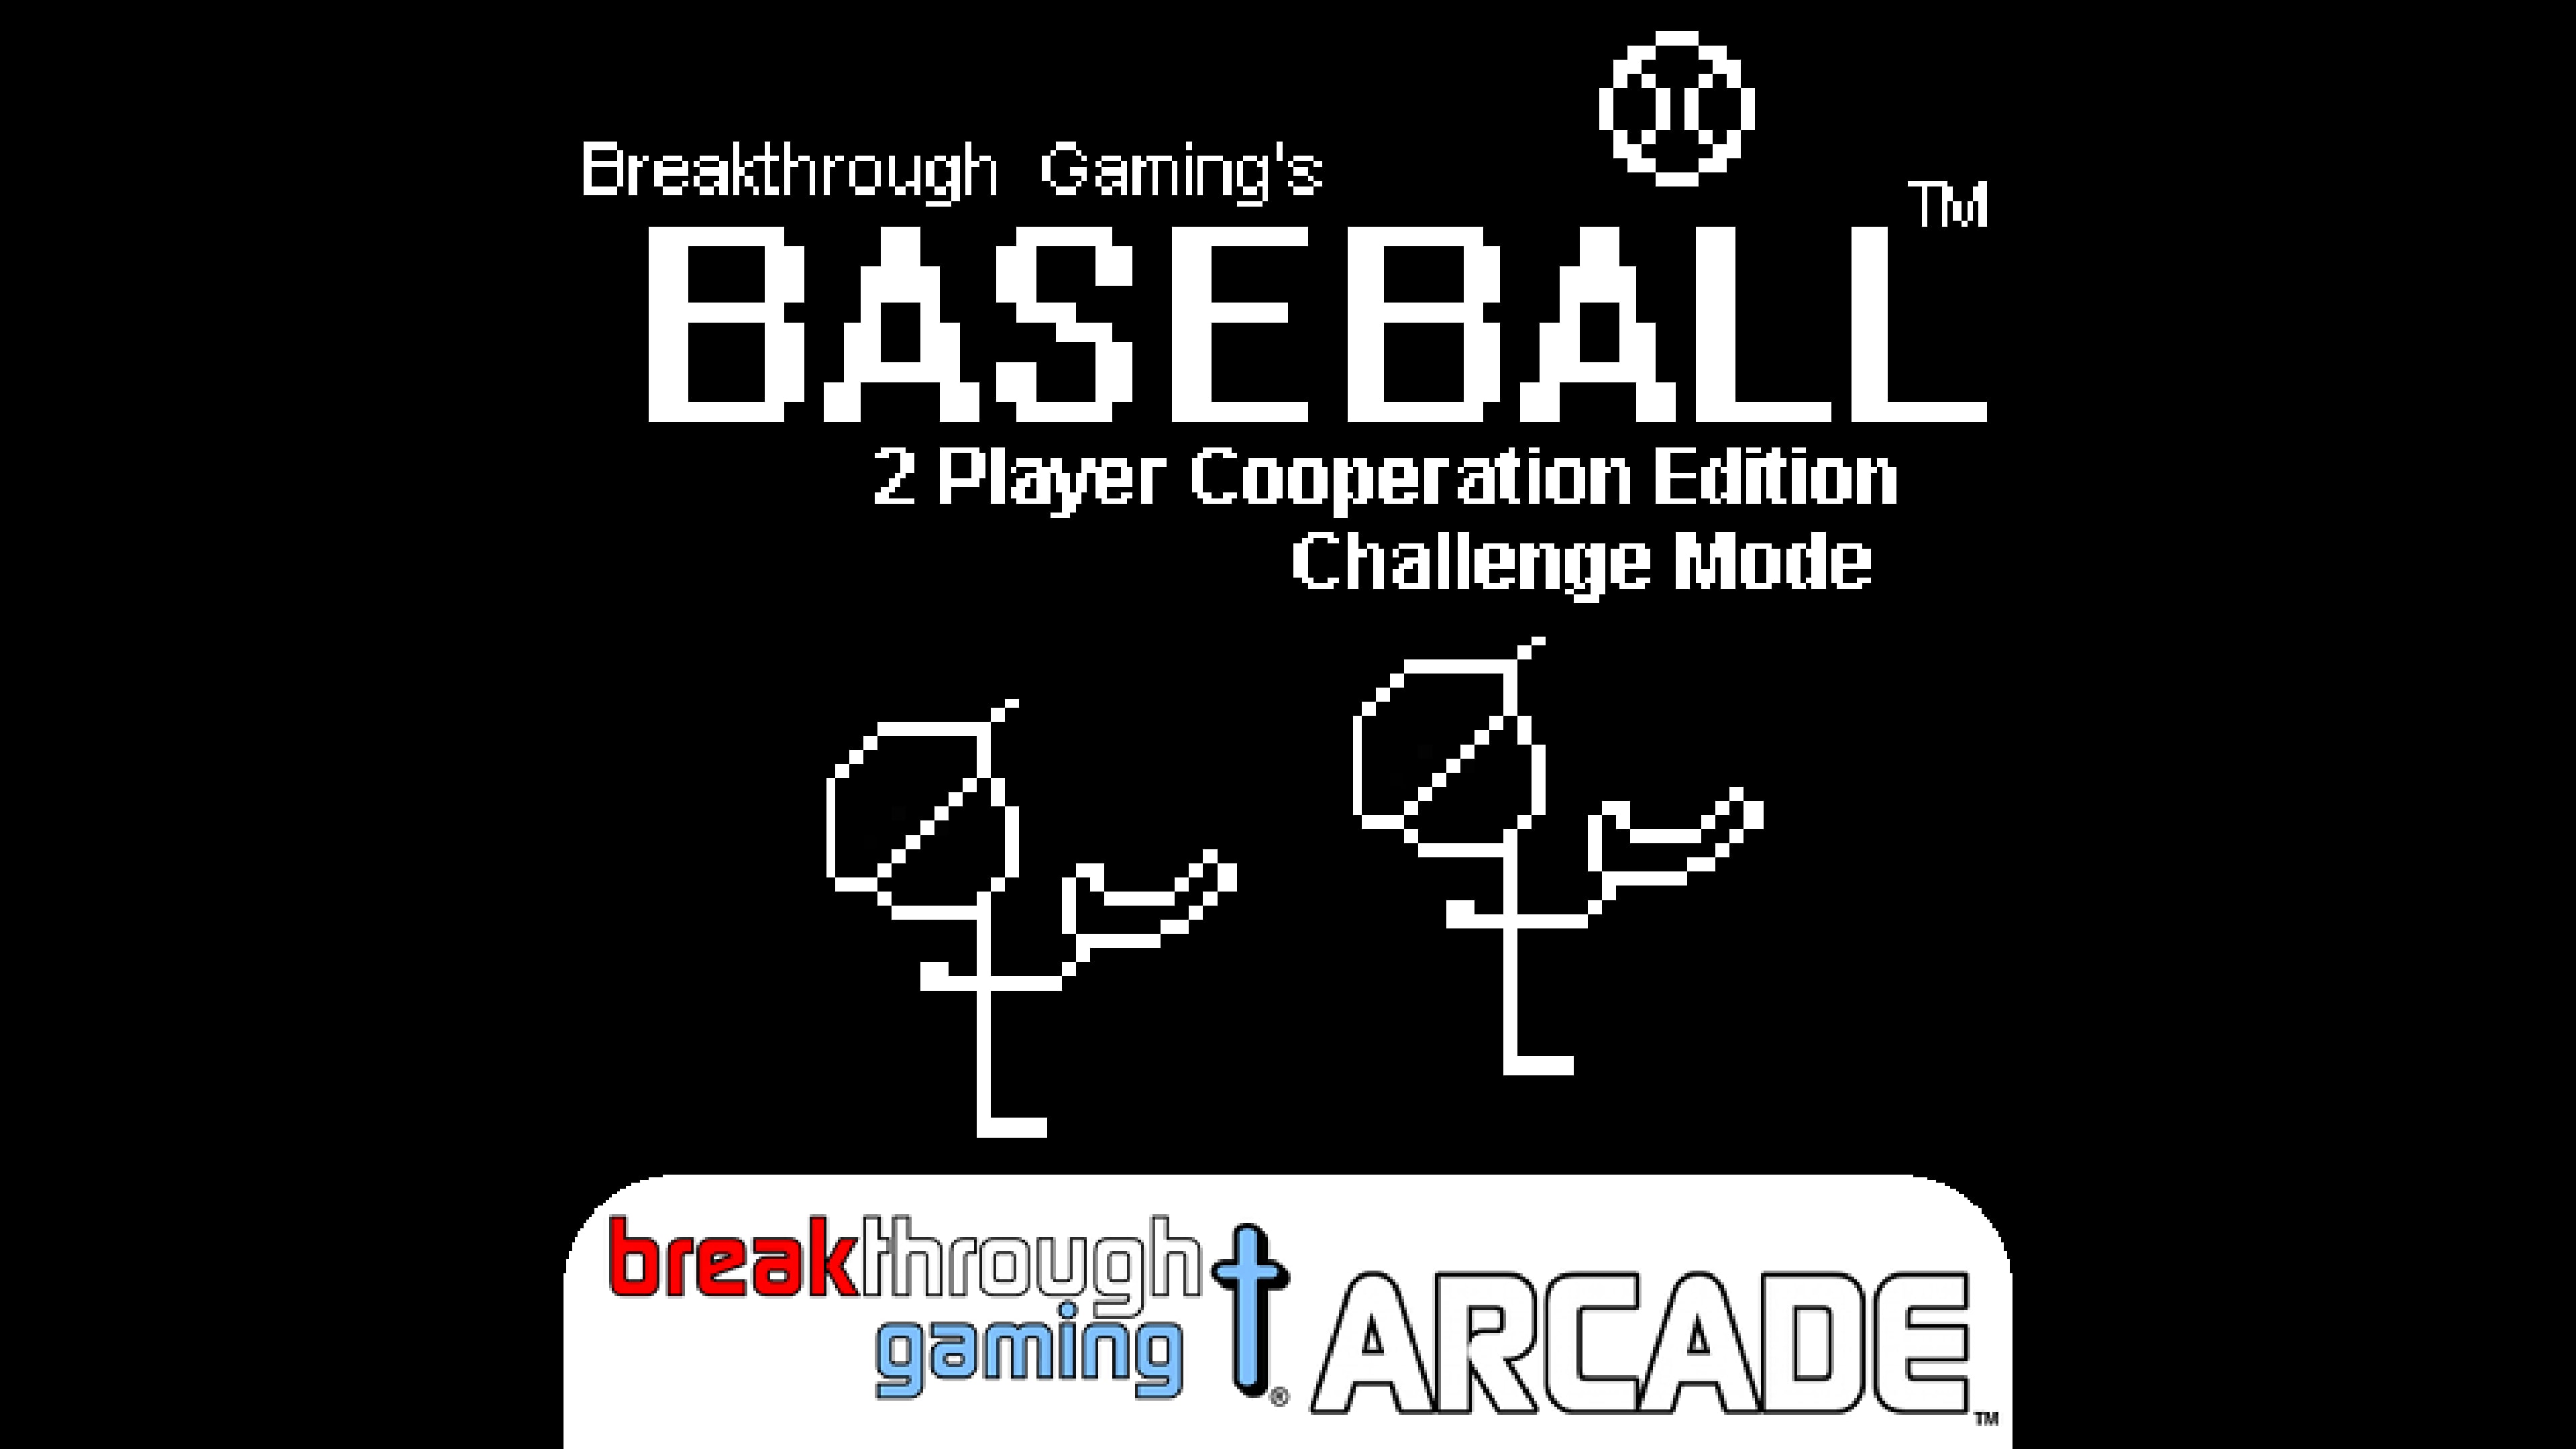 Baseball (2 Player Cooperation Edition) (Challenge Mode) - Breakthrough Gaming Arcade